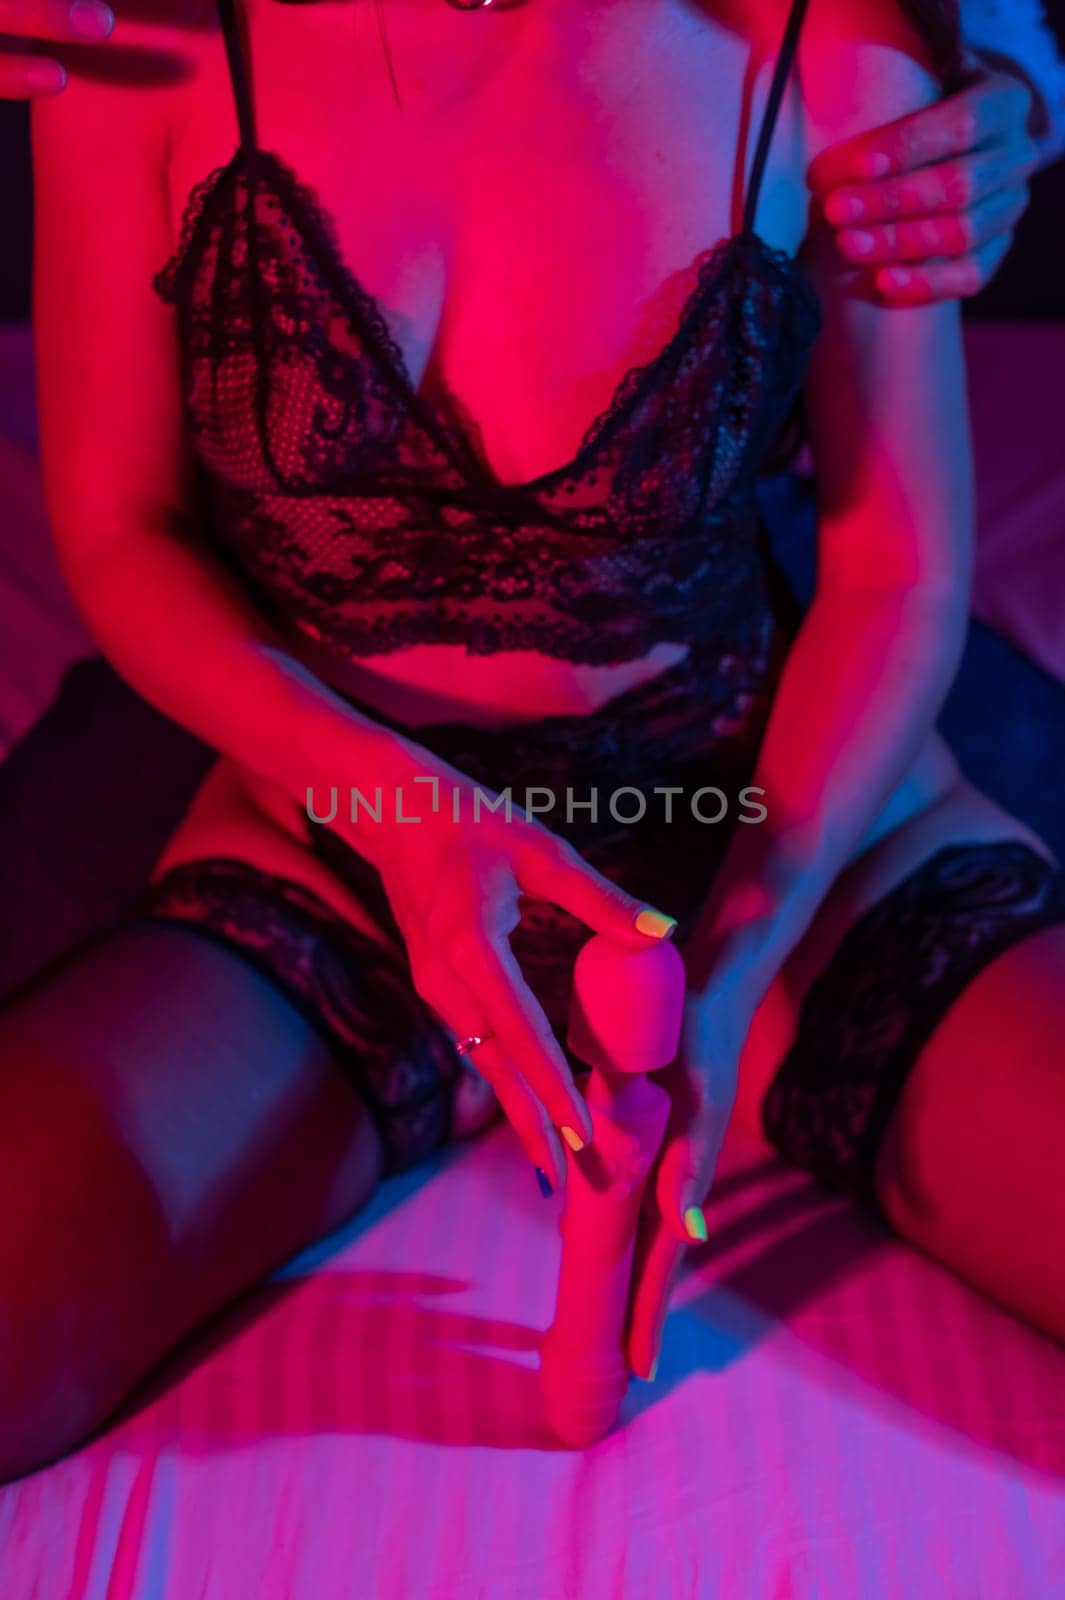 Man and woman in bedroom in red blue neon light using dildo